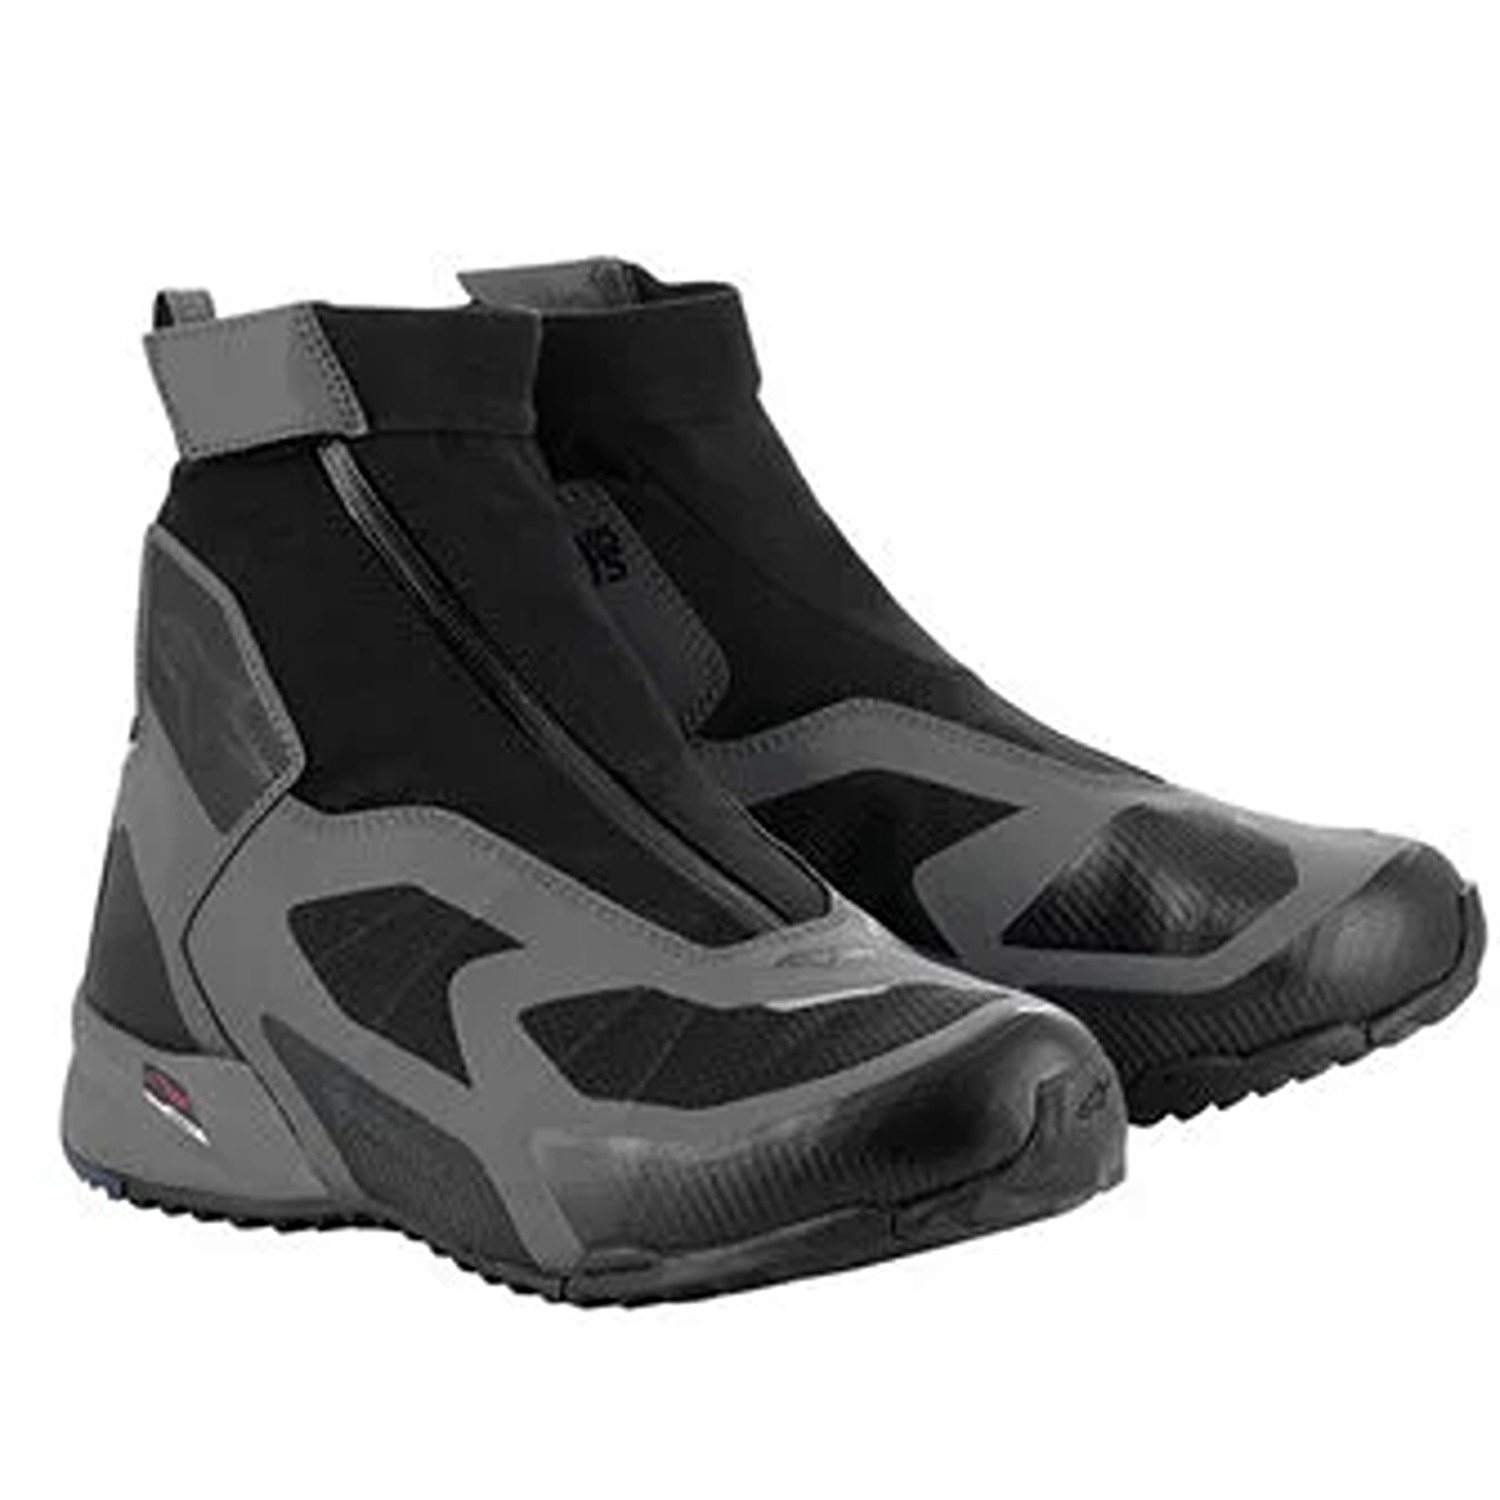 Image of Alpinestars CR-8 Gore-Tex Shoes Black Mid Gray Bright Red Size US 13 ID 8059347260259